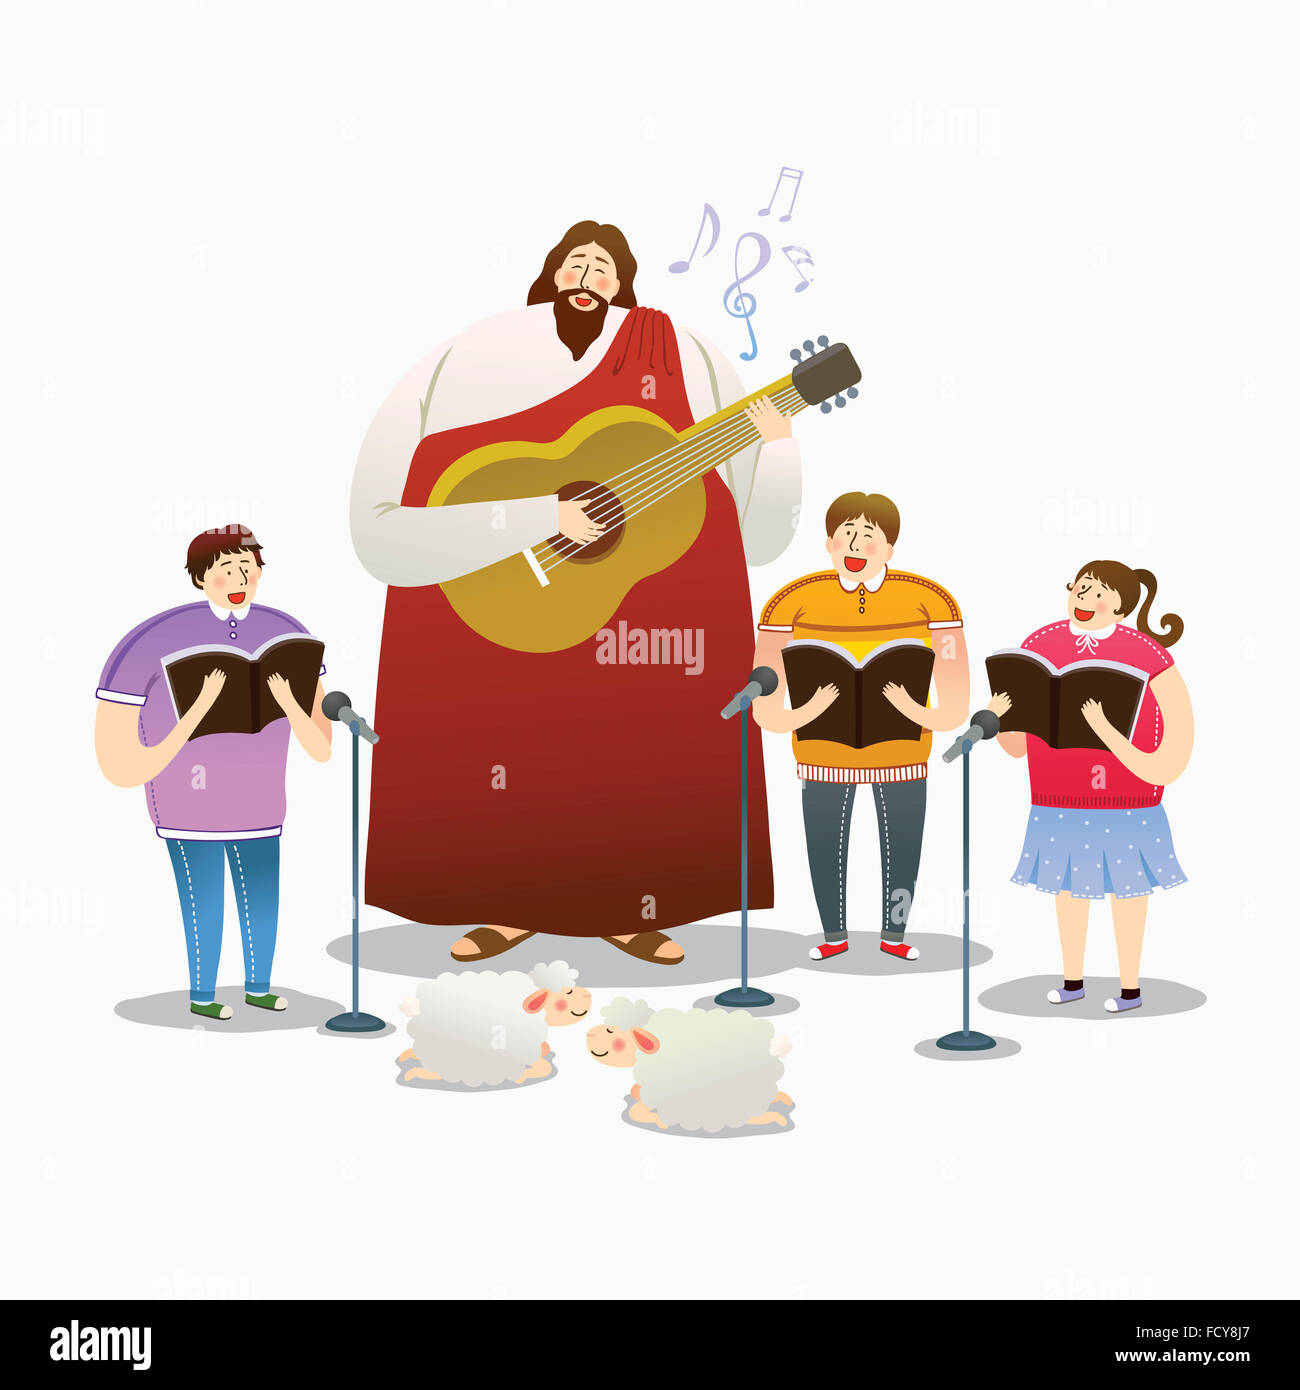 Jesus Christ playing guitar and people singing hymns together Stock Photo